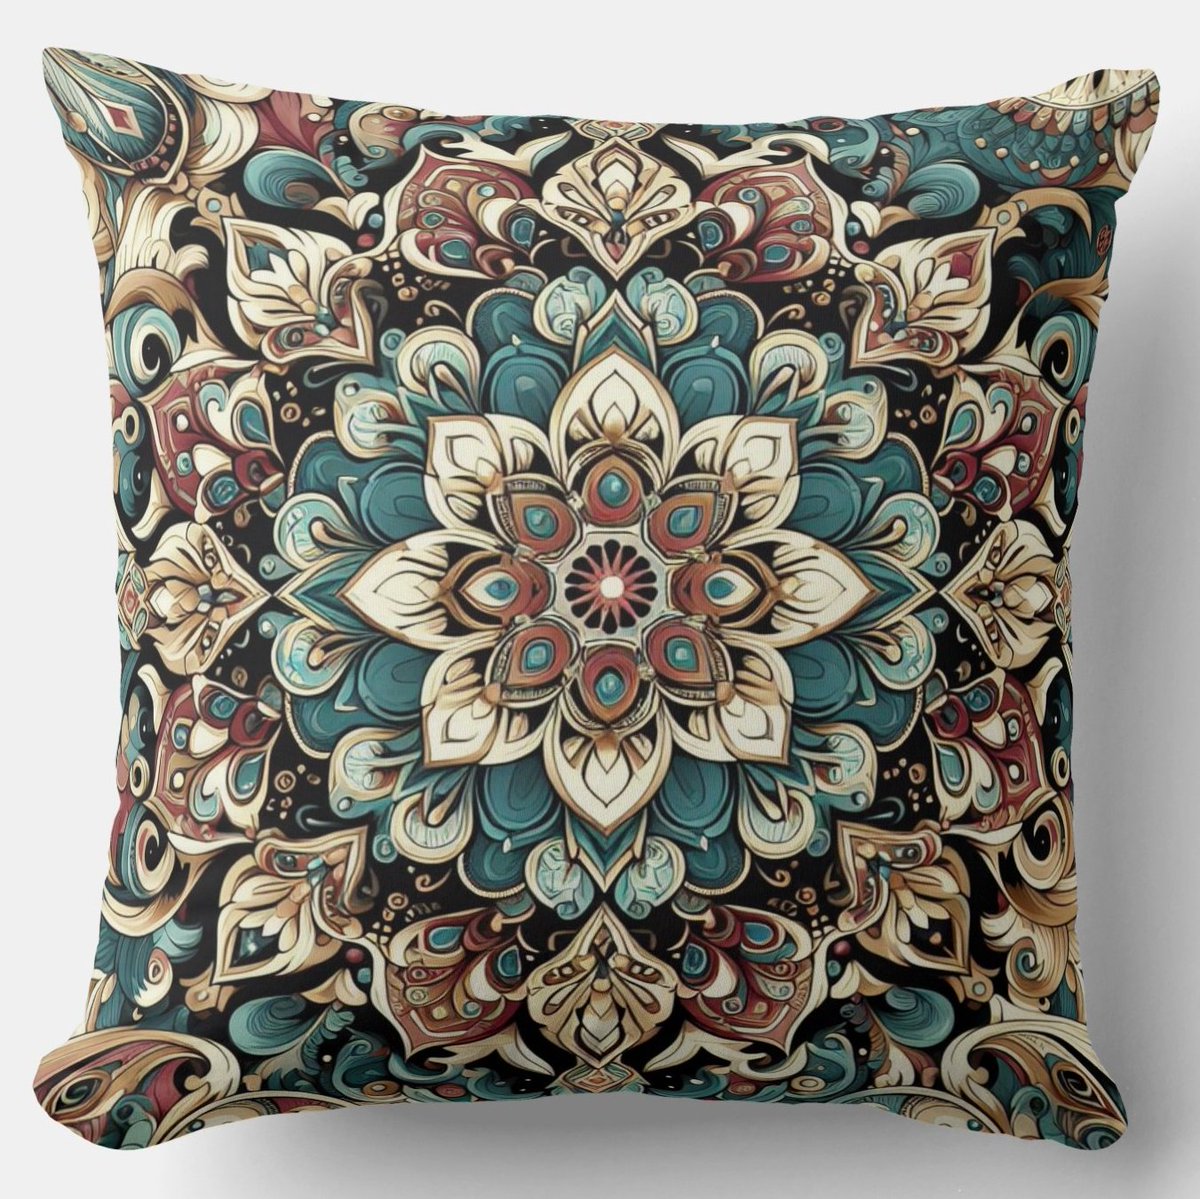 Embrace this Bohemian zazzle.com/bohemian_rhaps… timeless style #floral cushion, a #vintage charm meeting the #modern #art comfort. #ThrowPillow #homedecoration #interiordesign #luxuryhome #decoration #pillows #giftideas This decorative piece is more than just a #pillow; #uniqueart